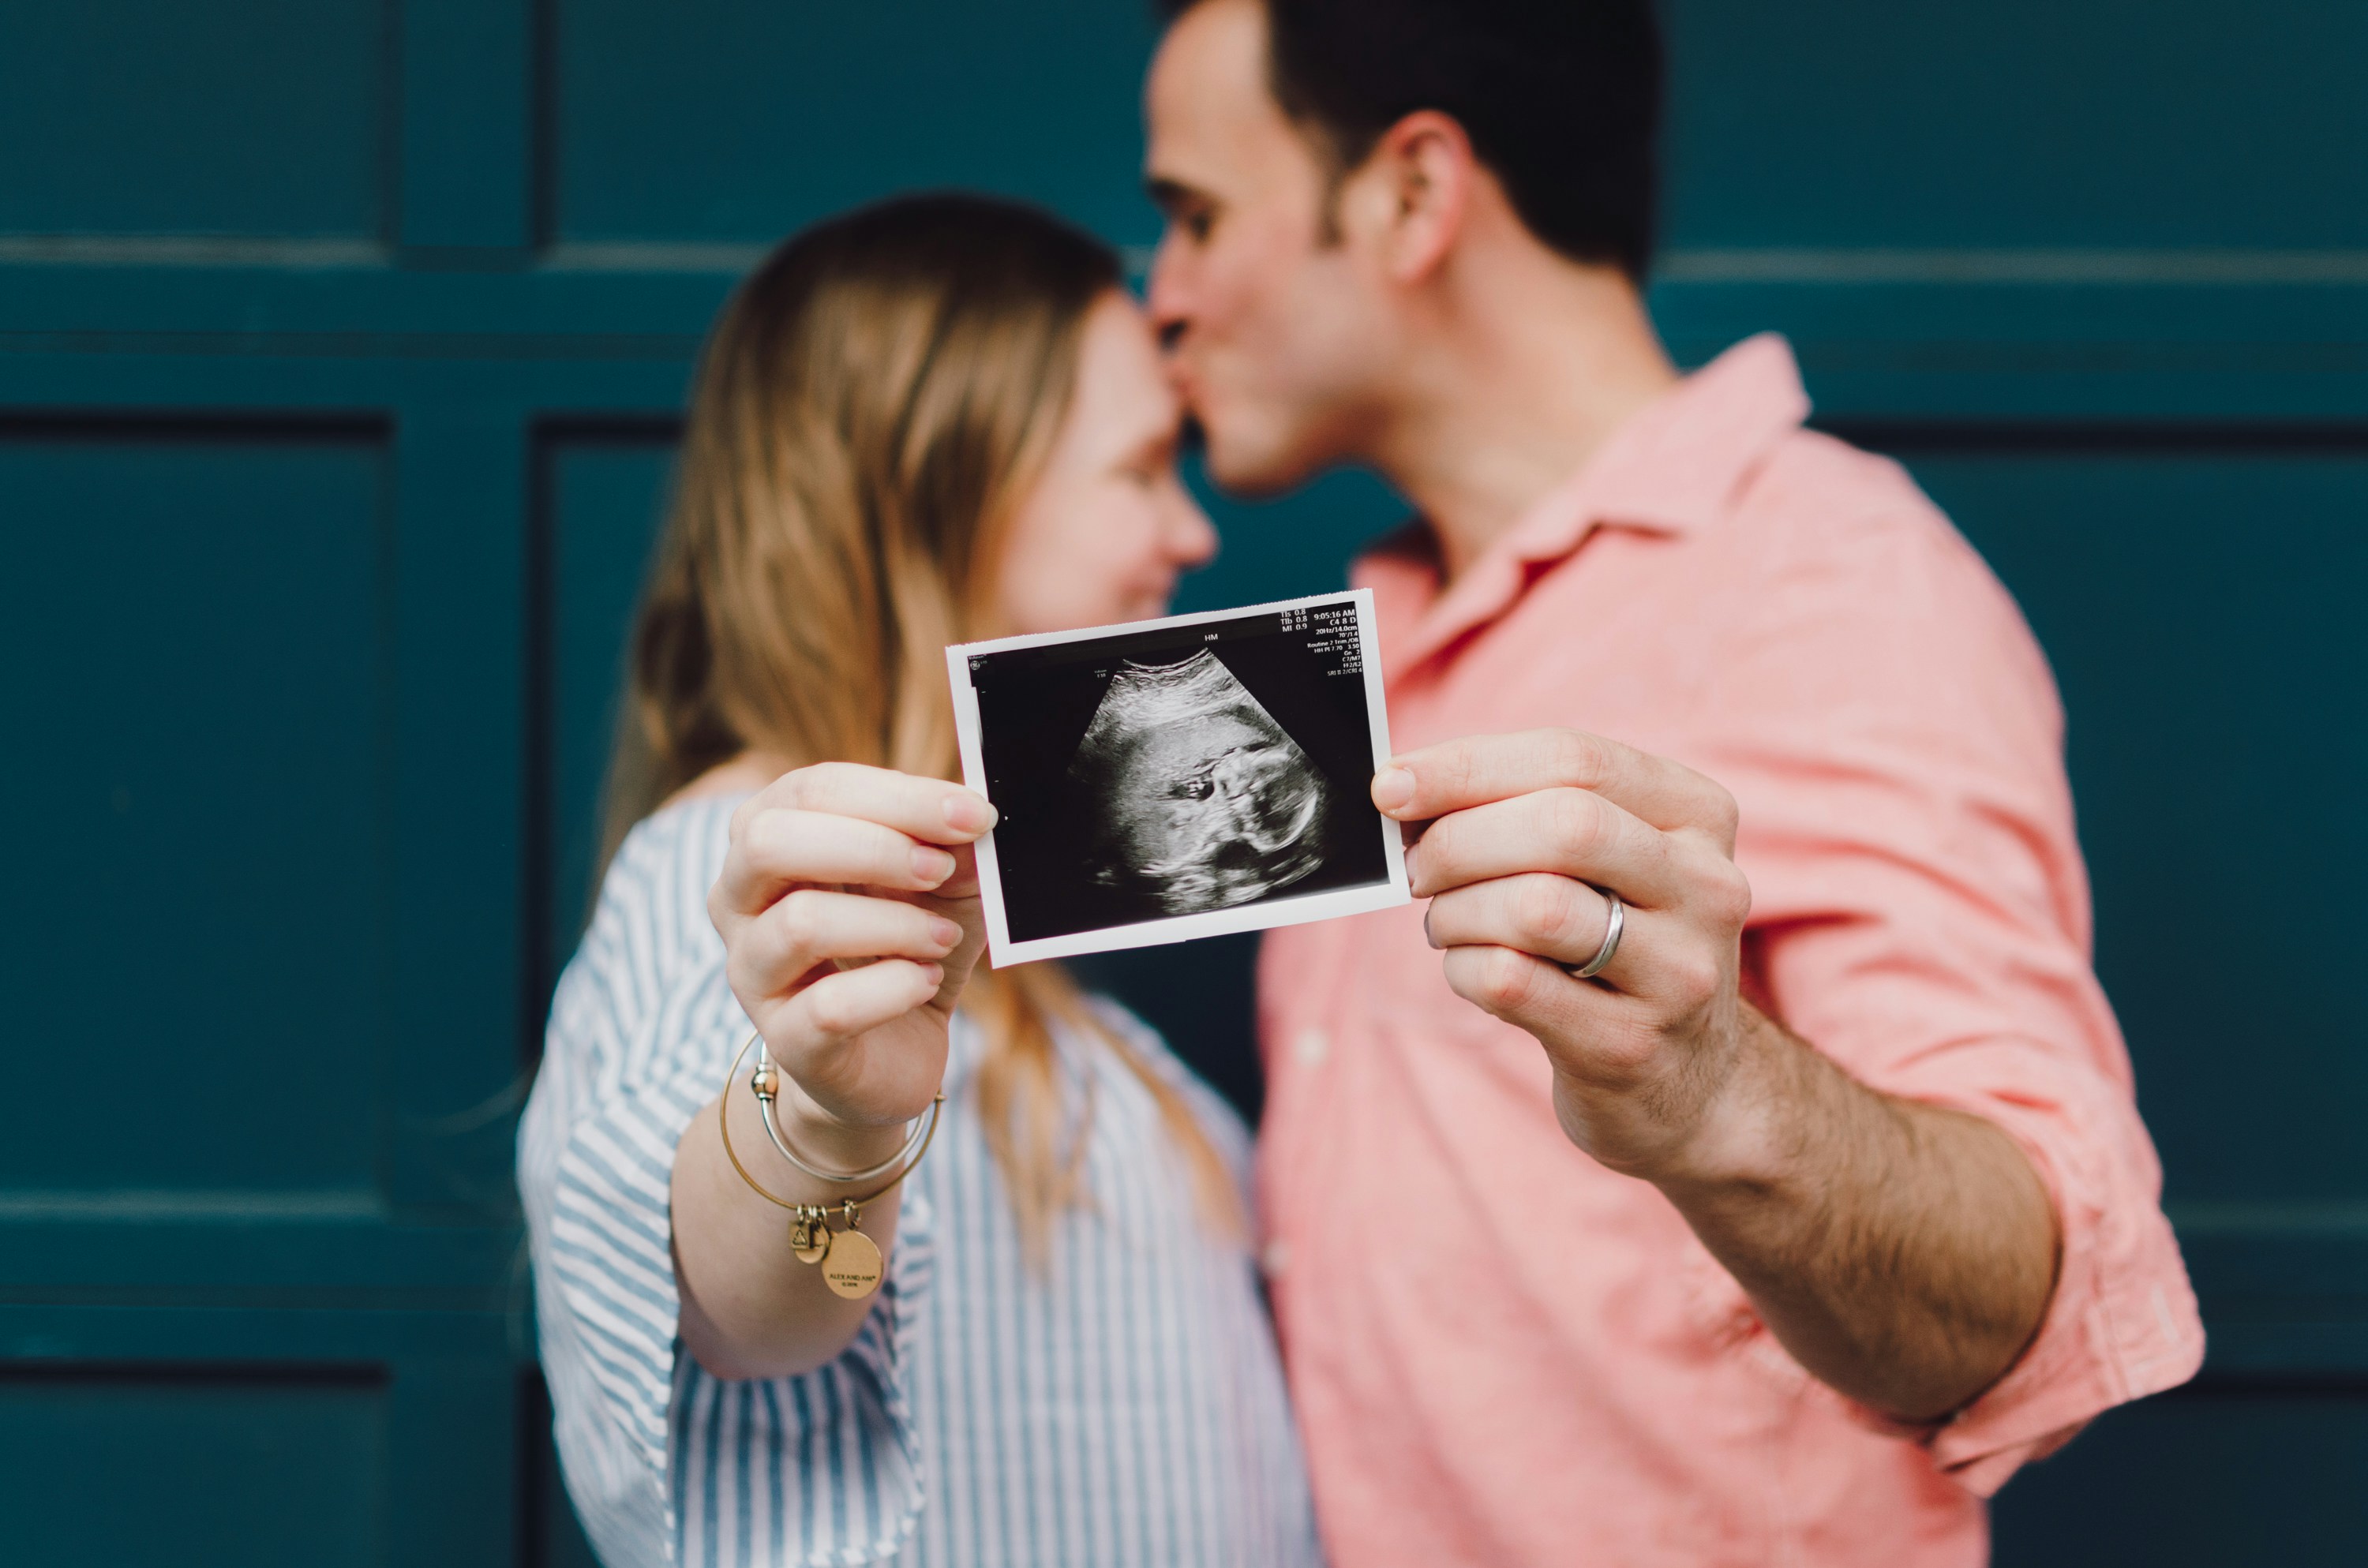 great photo recipe,how to photograph some friends of mine holding an ultrasound picture of their sweet baby; man kissing woman's forehead white holding ultrasound photo